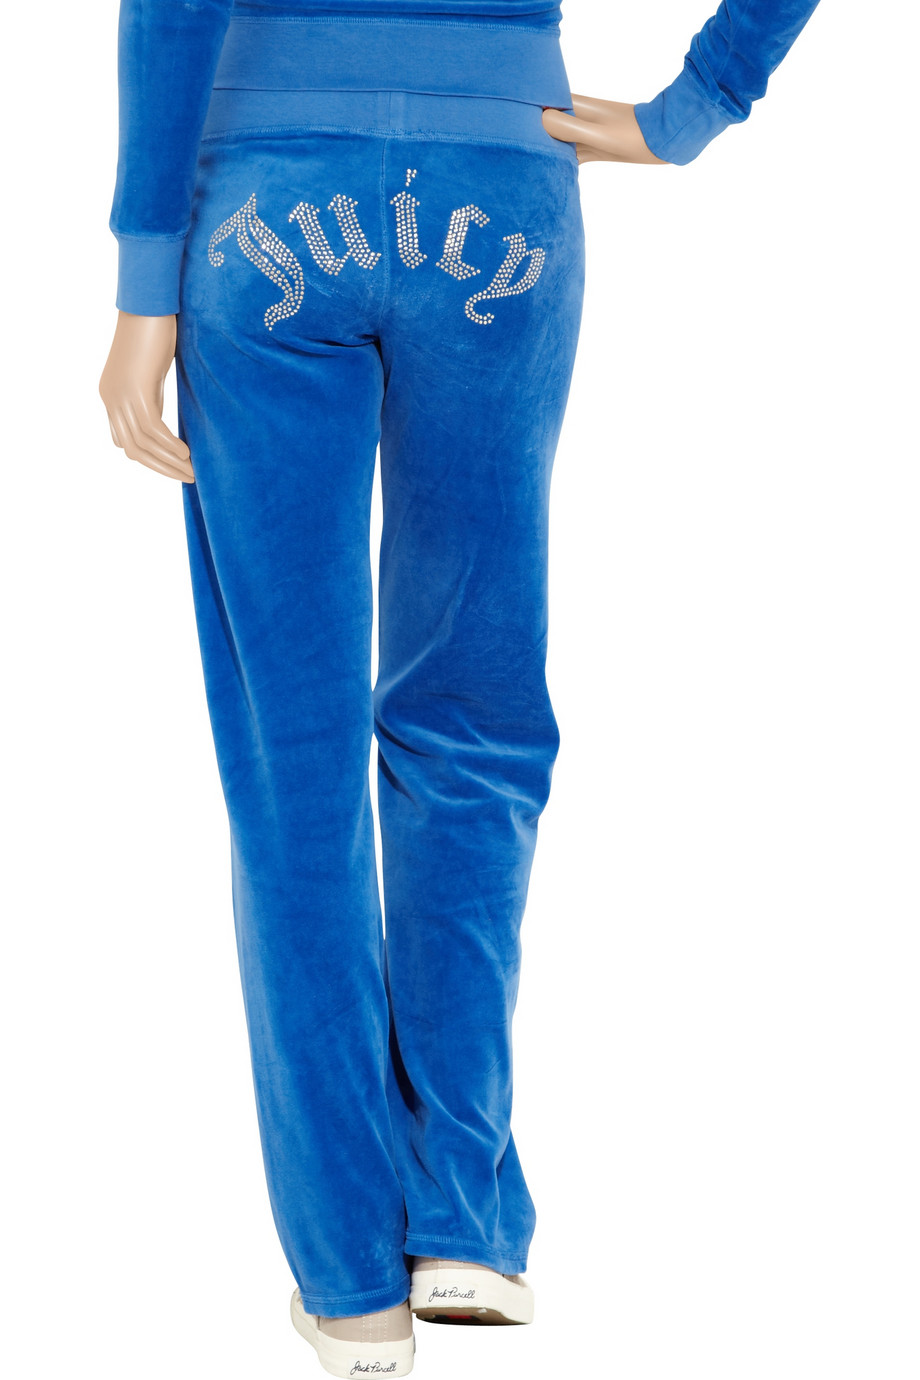 Update more than 115 juicy couture velour track pants - in.eteachers